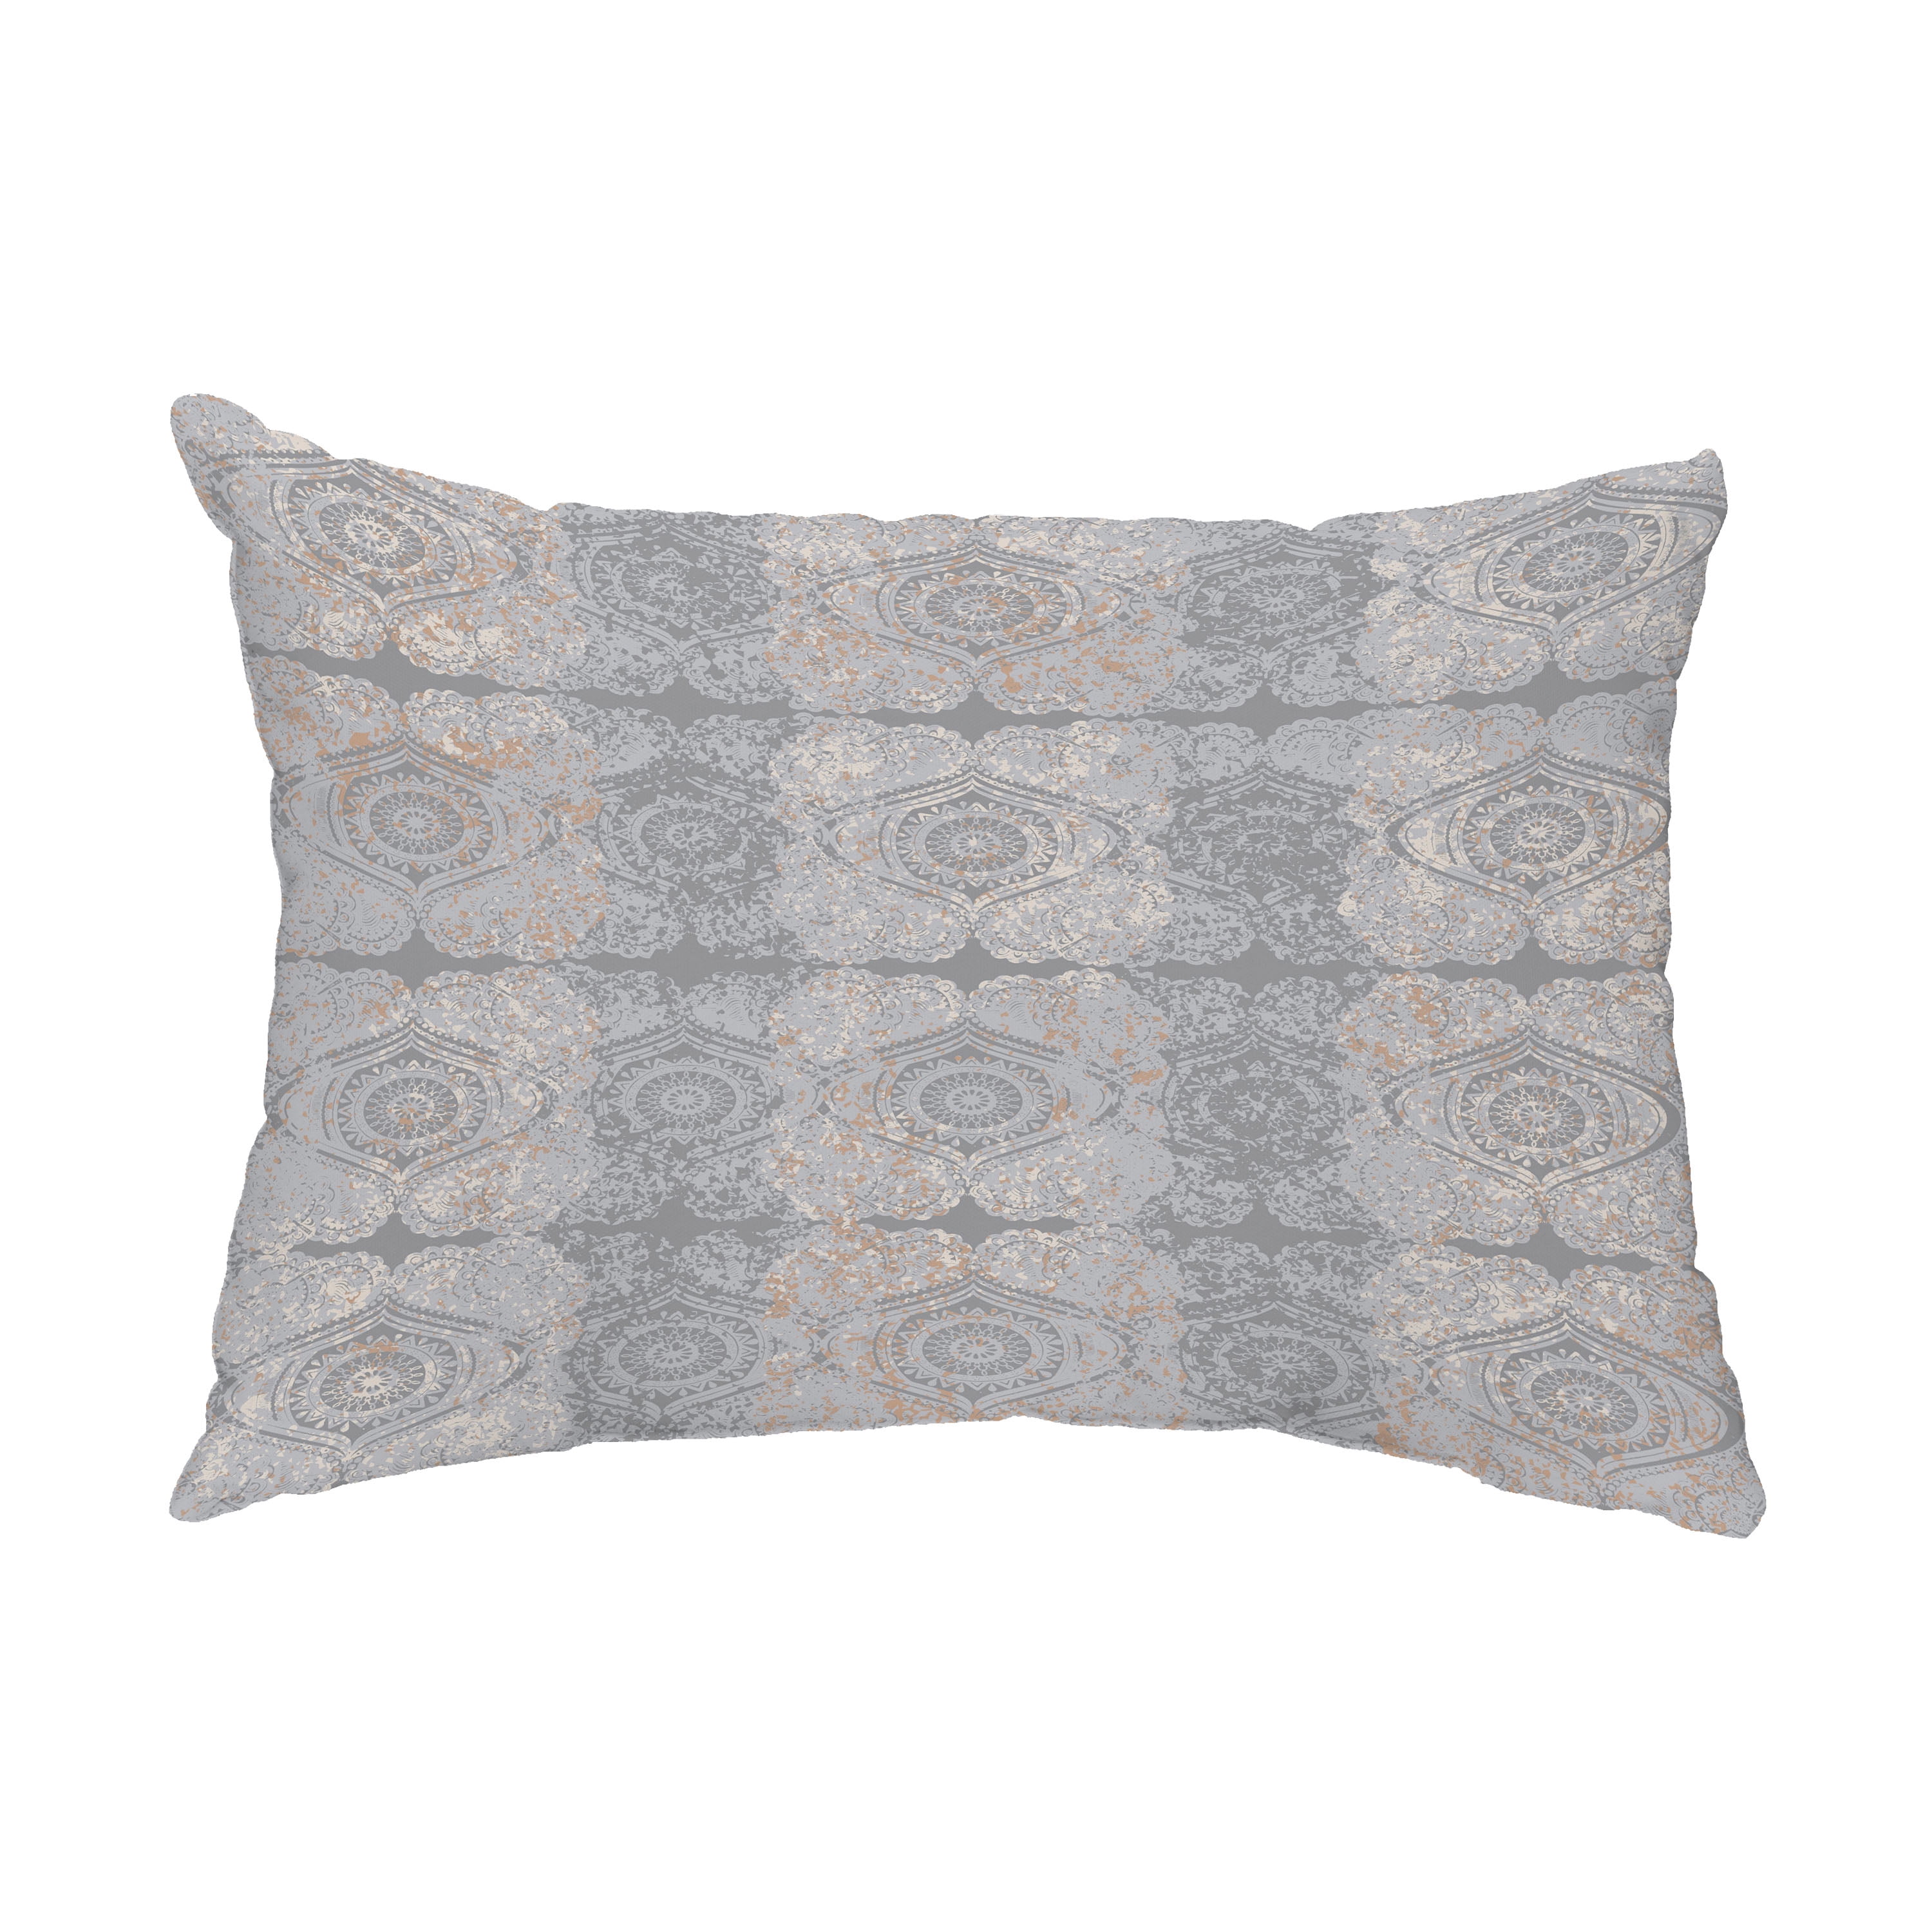 Patina 14x20 Inch Gray Decorative Abstract Outdoor Throw Pillow ...